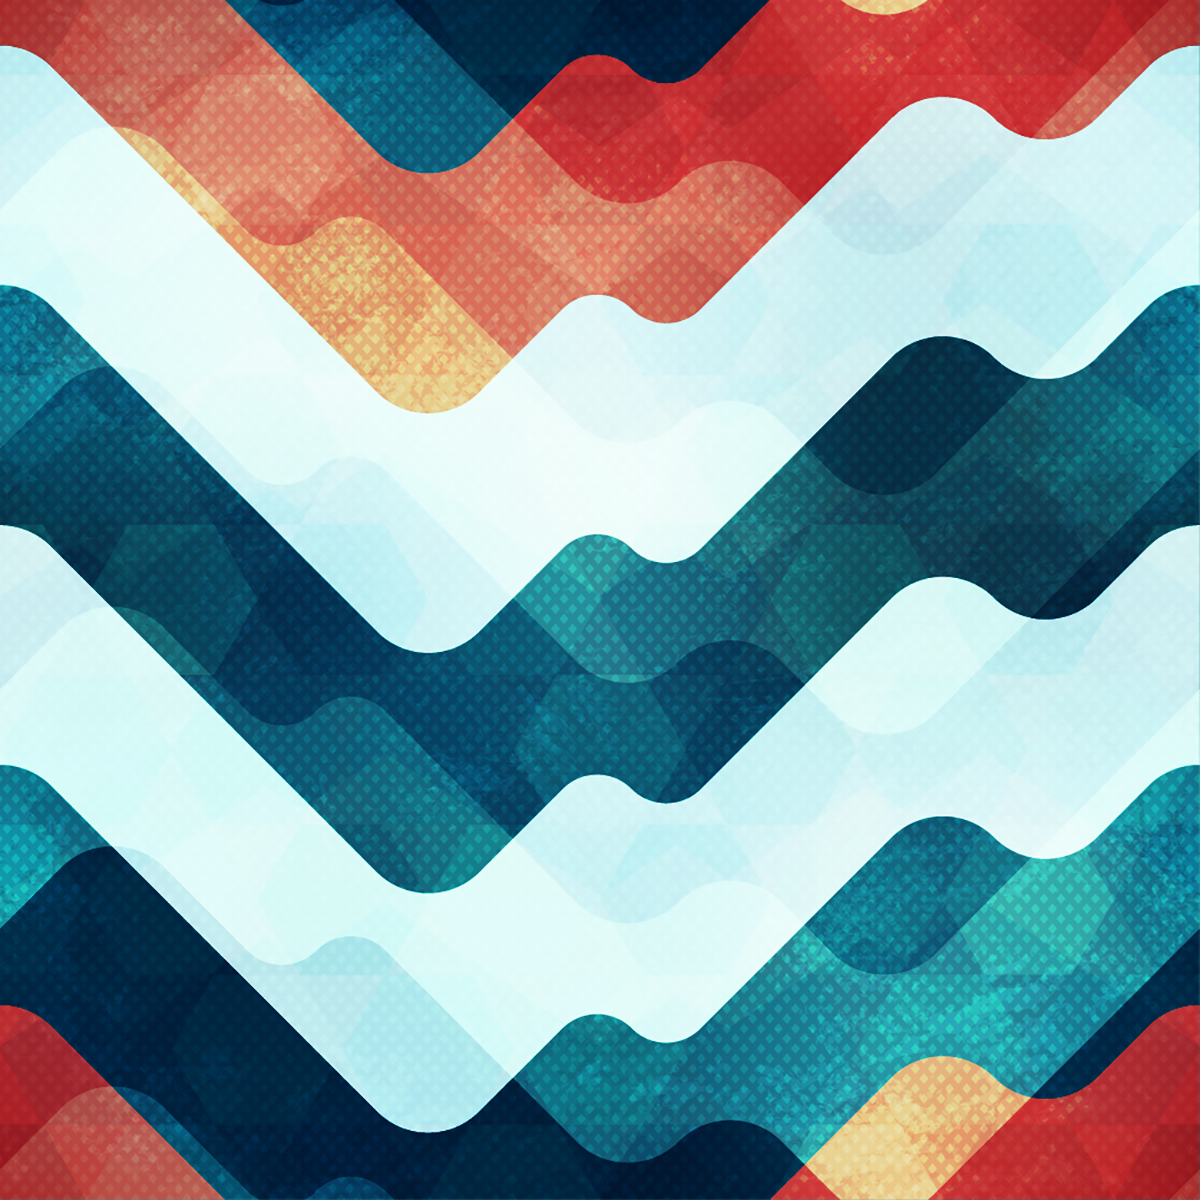 A colorful pattern with white and blue lines